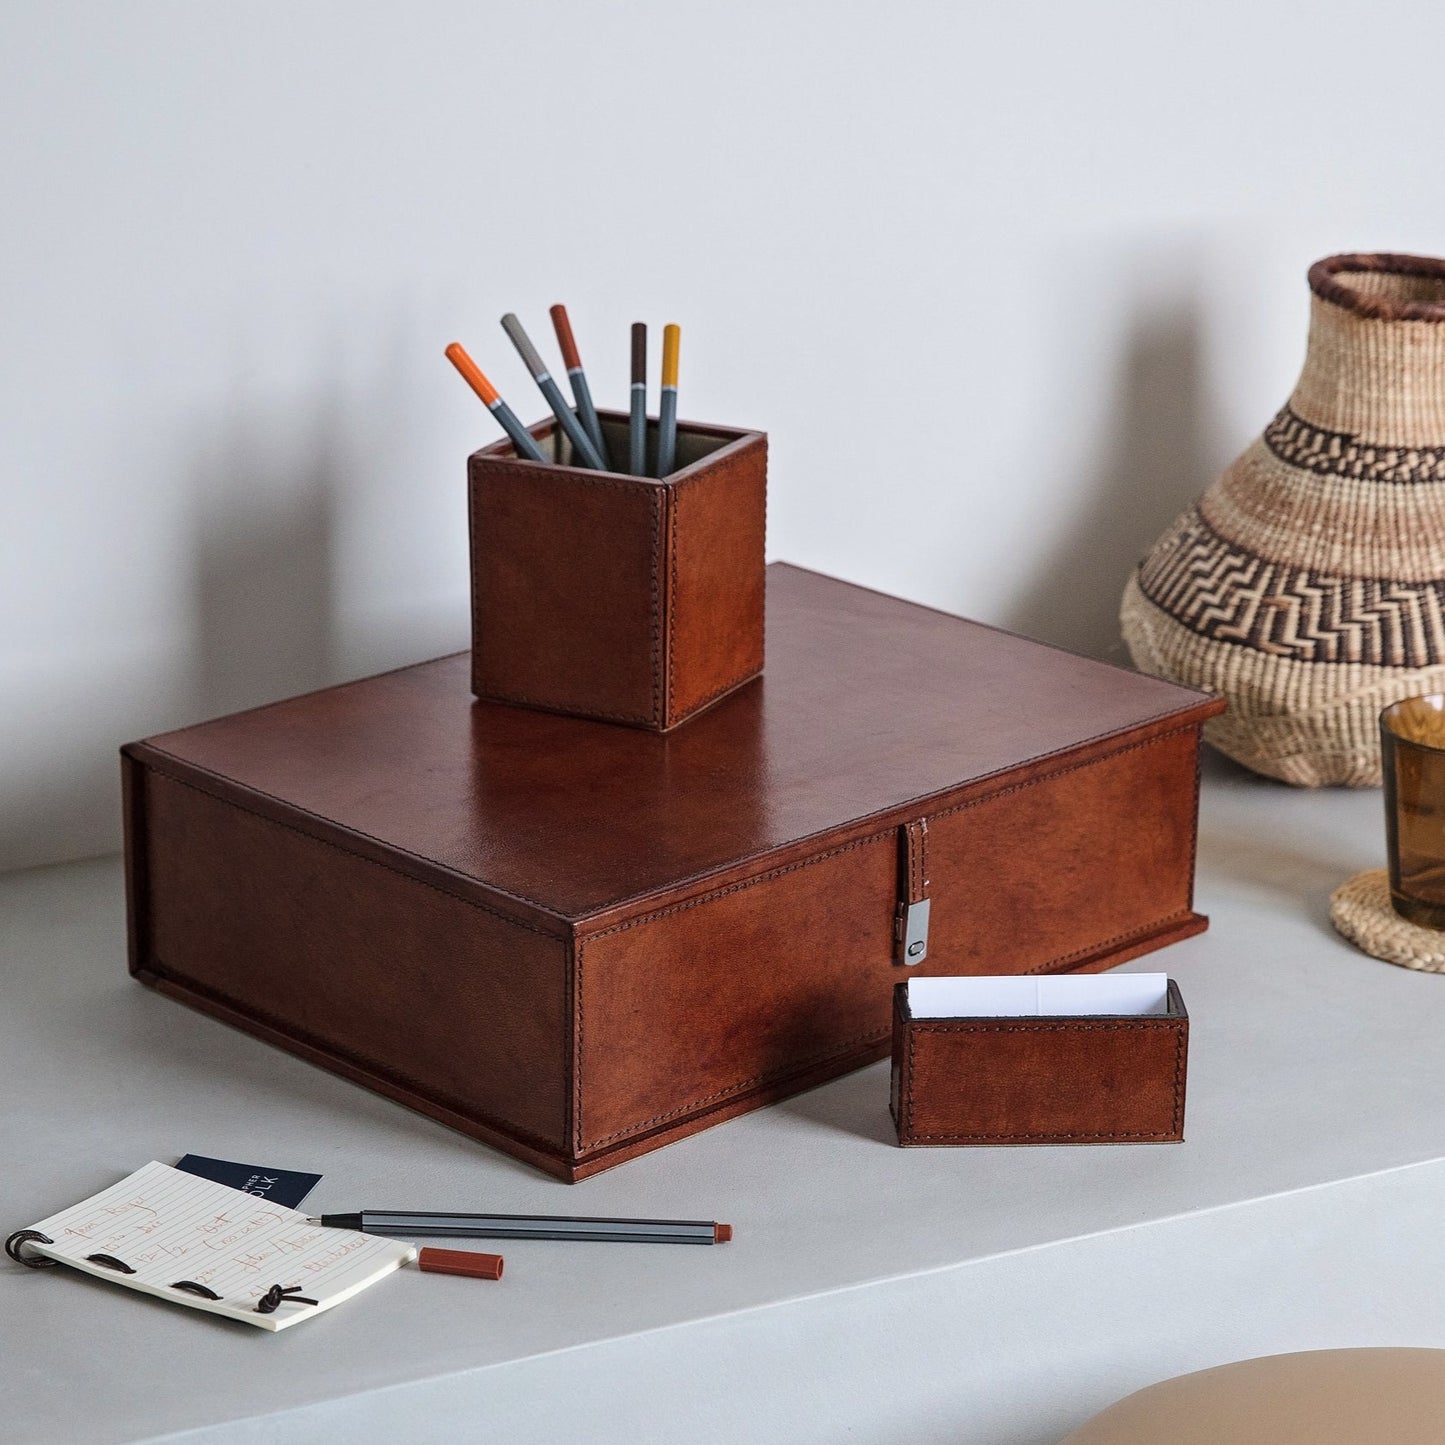 Desk accessory set in tan leather, combining a leather box file, pen pot, and business card holder. Personalise for a thoughtful and unique gift to celebrate a new job.